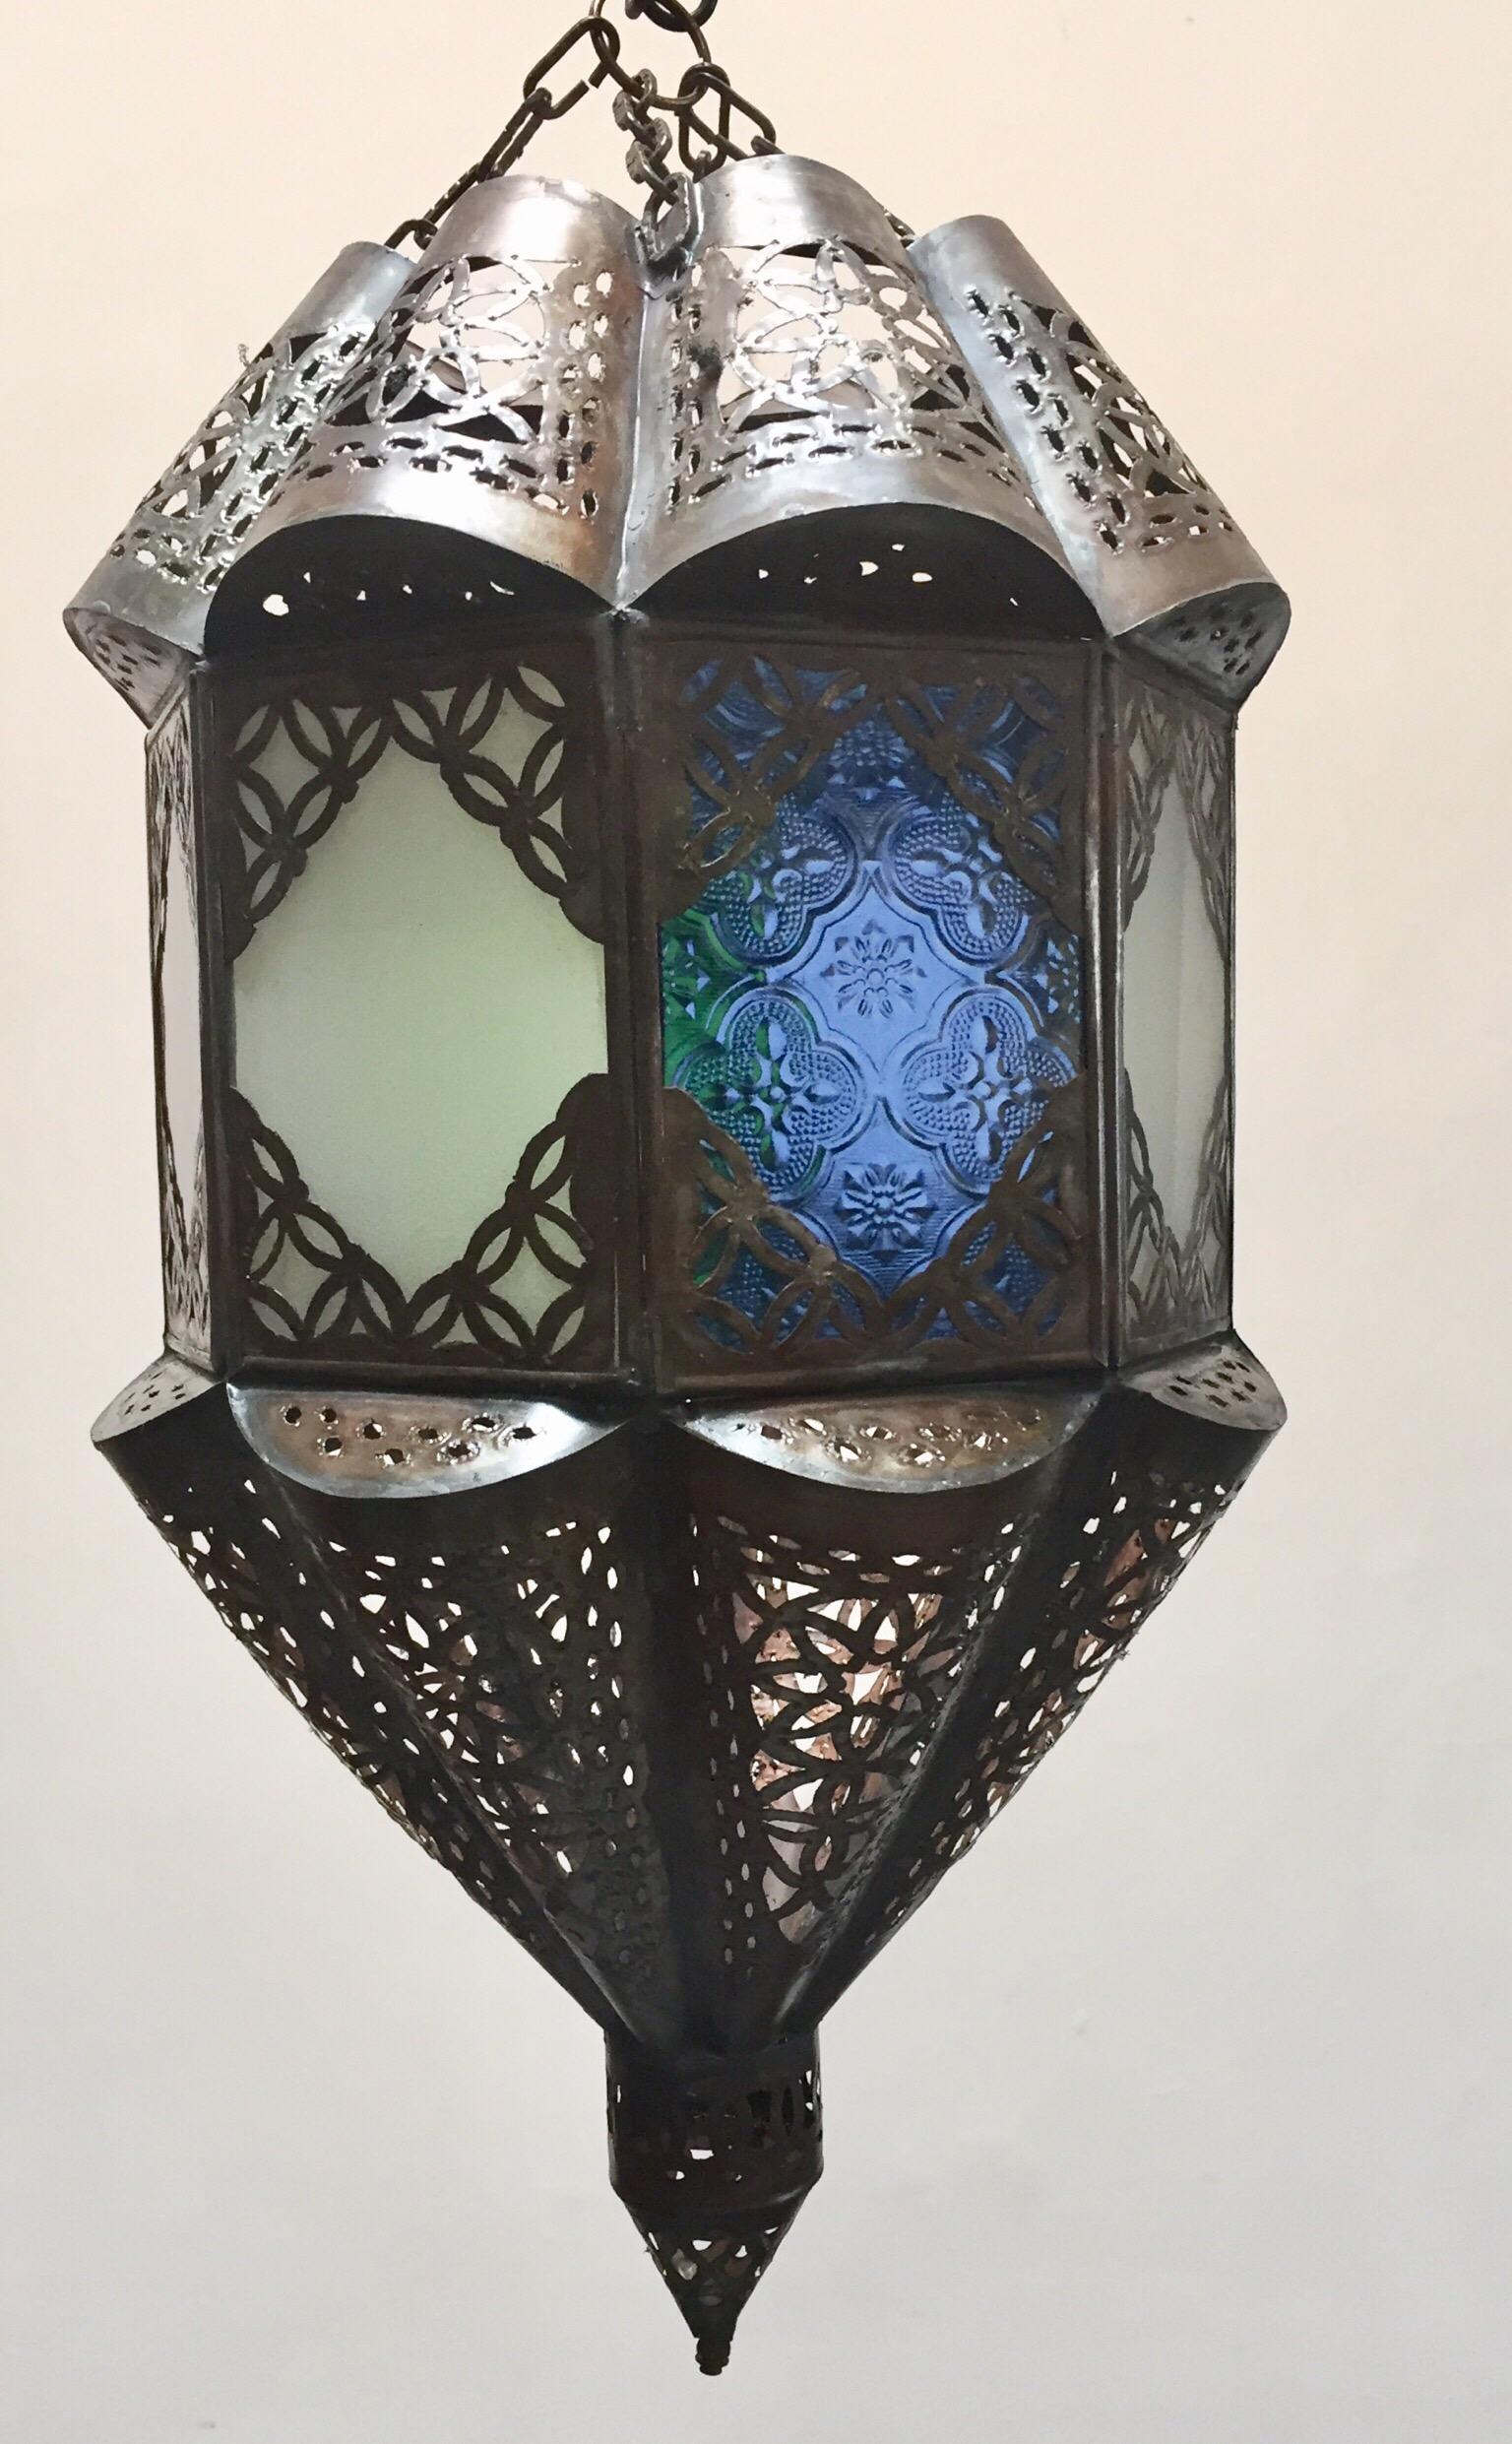 Stylish handcrafted Moroccan lantern pendant with frosted milky glass. Handmade with small cut-glass with Moorish filigree metal designs. Multiple available. Not wired for electricity, shade only.
Dimensions: 9